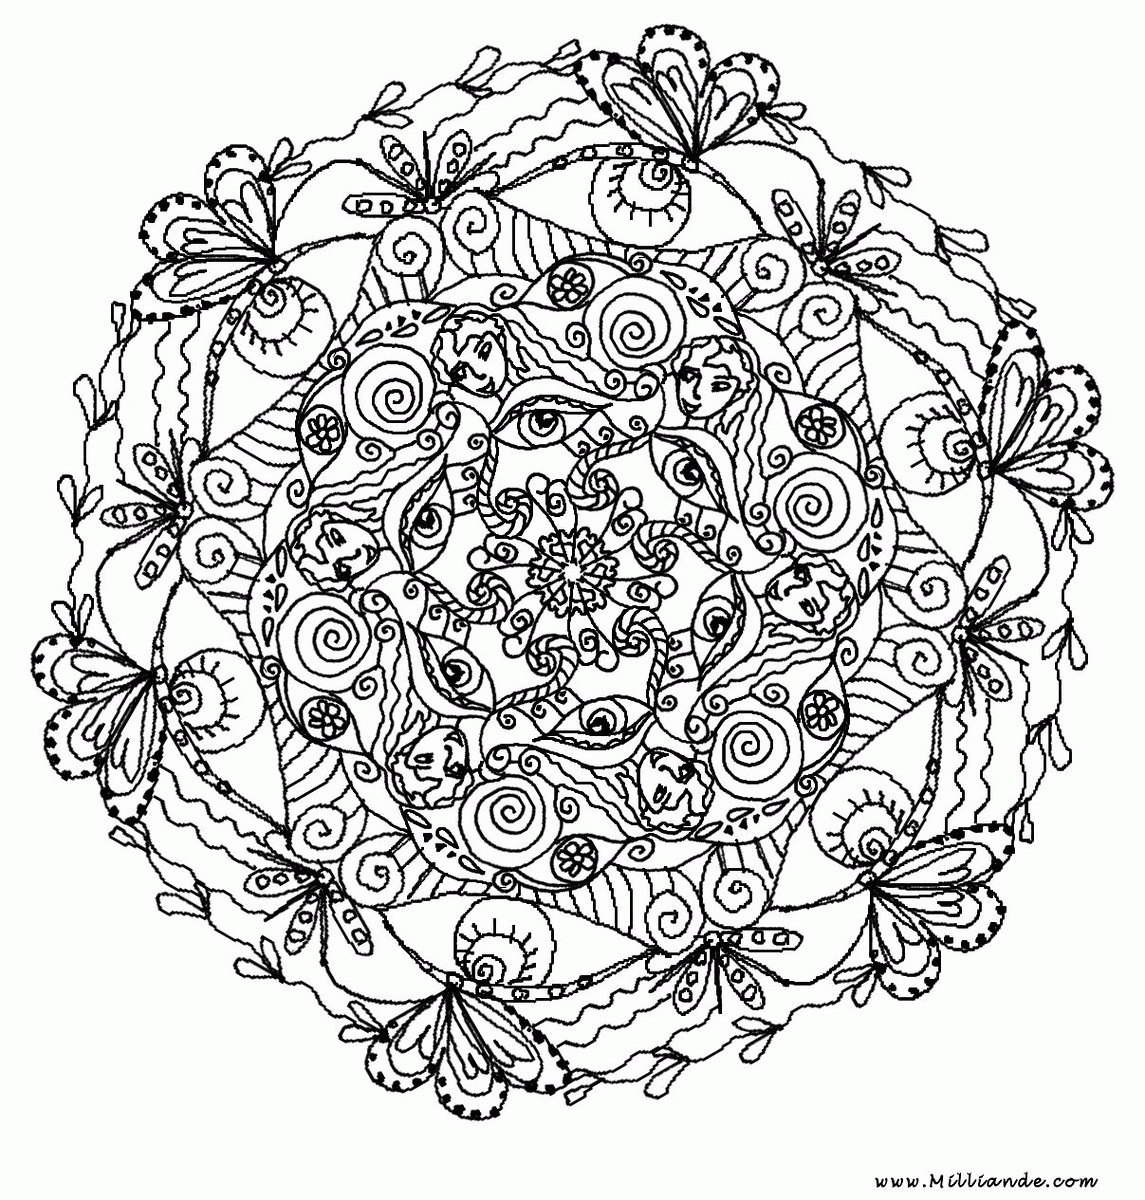 Mandala Coloring Pages Expert Level Printable - Coloring